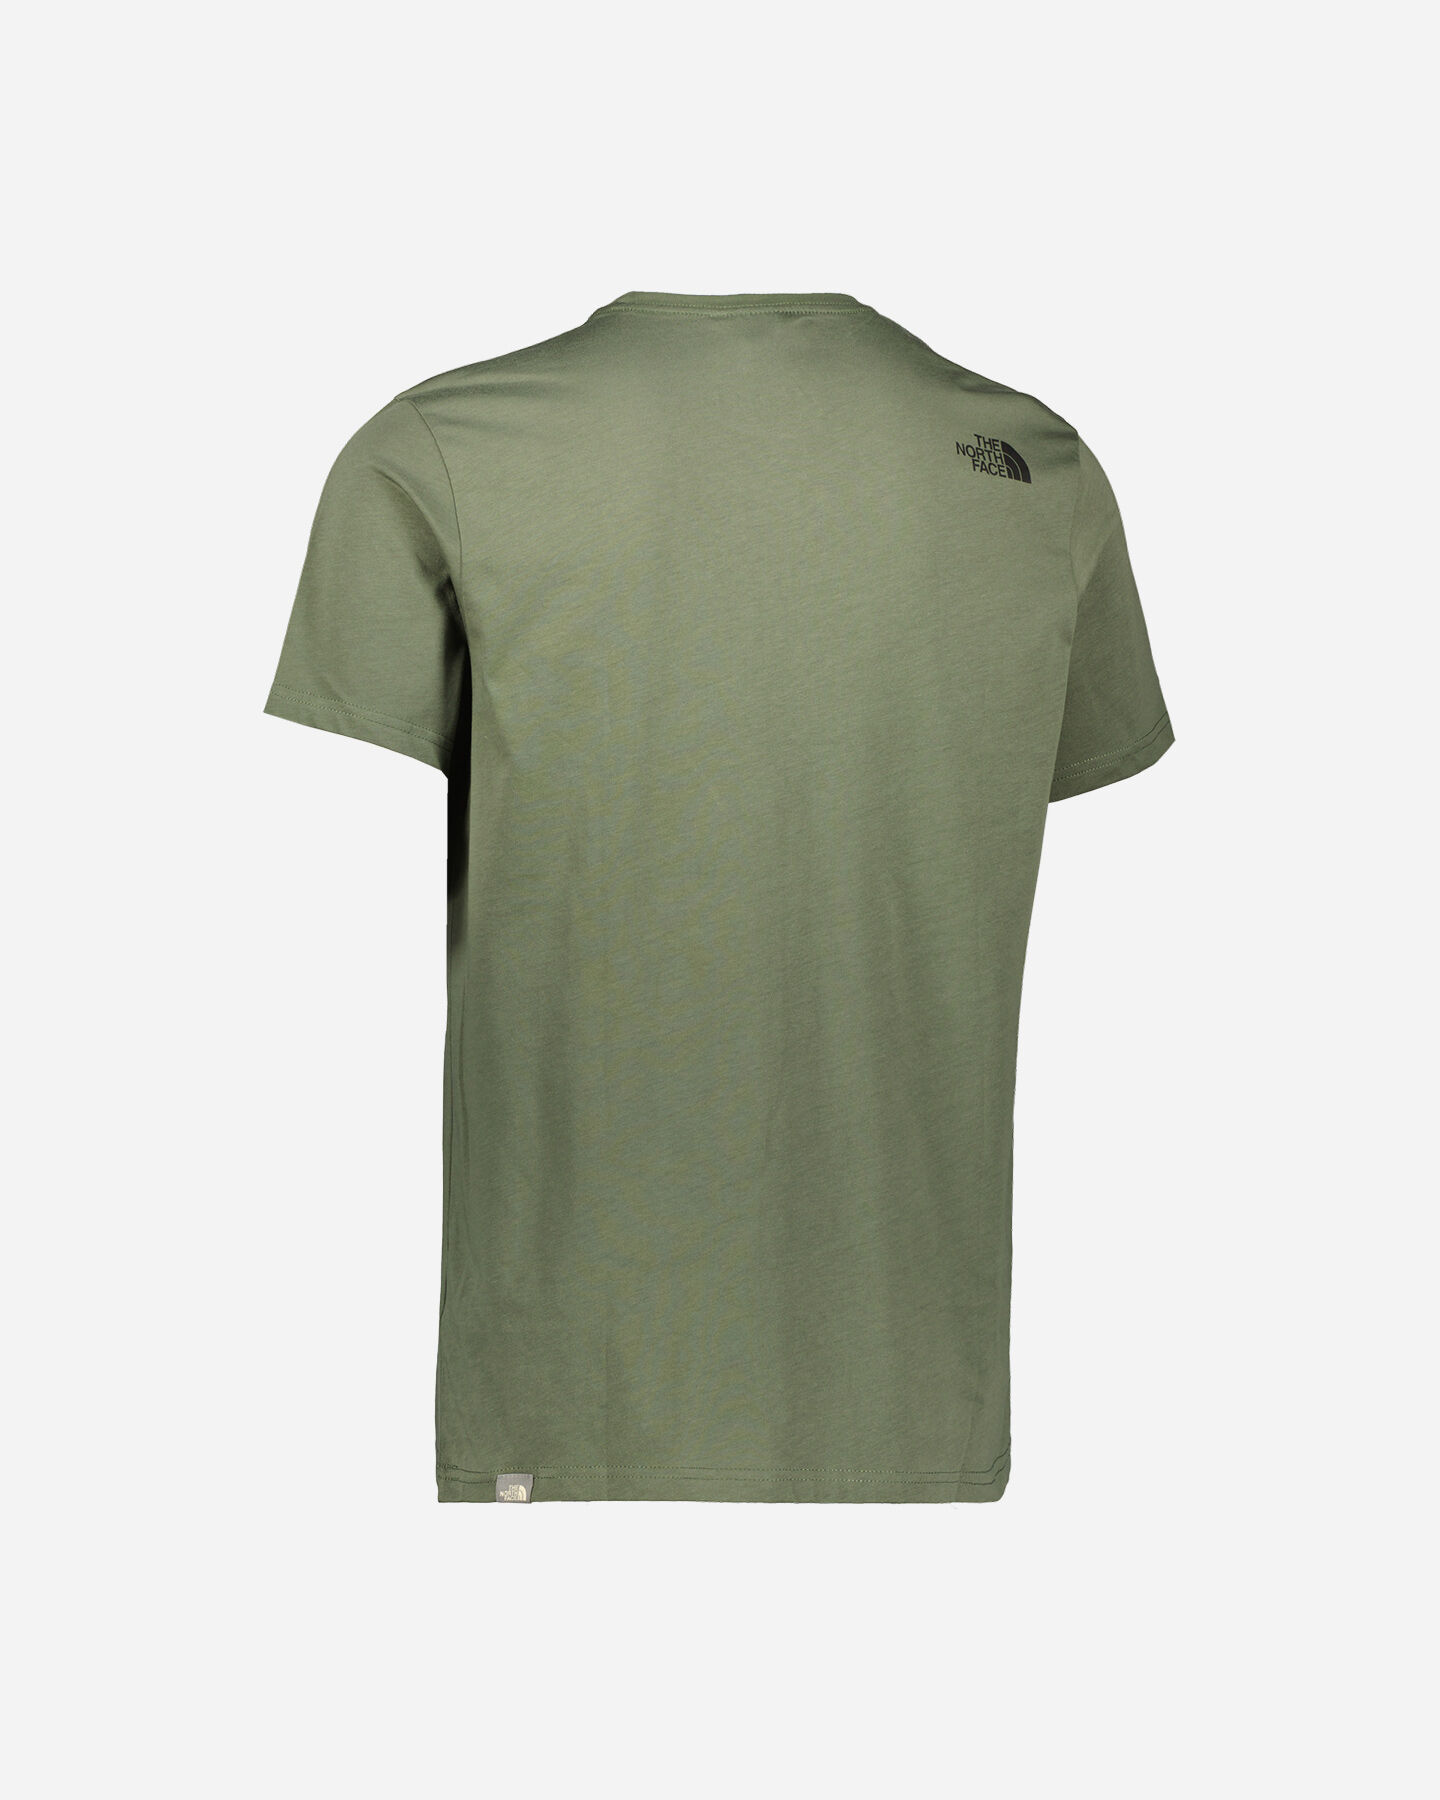  T-Shirt THE NORTH FACE LOGO BIG LOGO M S5477936|NYC|L scatto 1